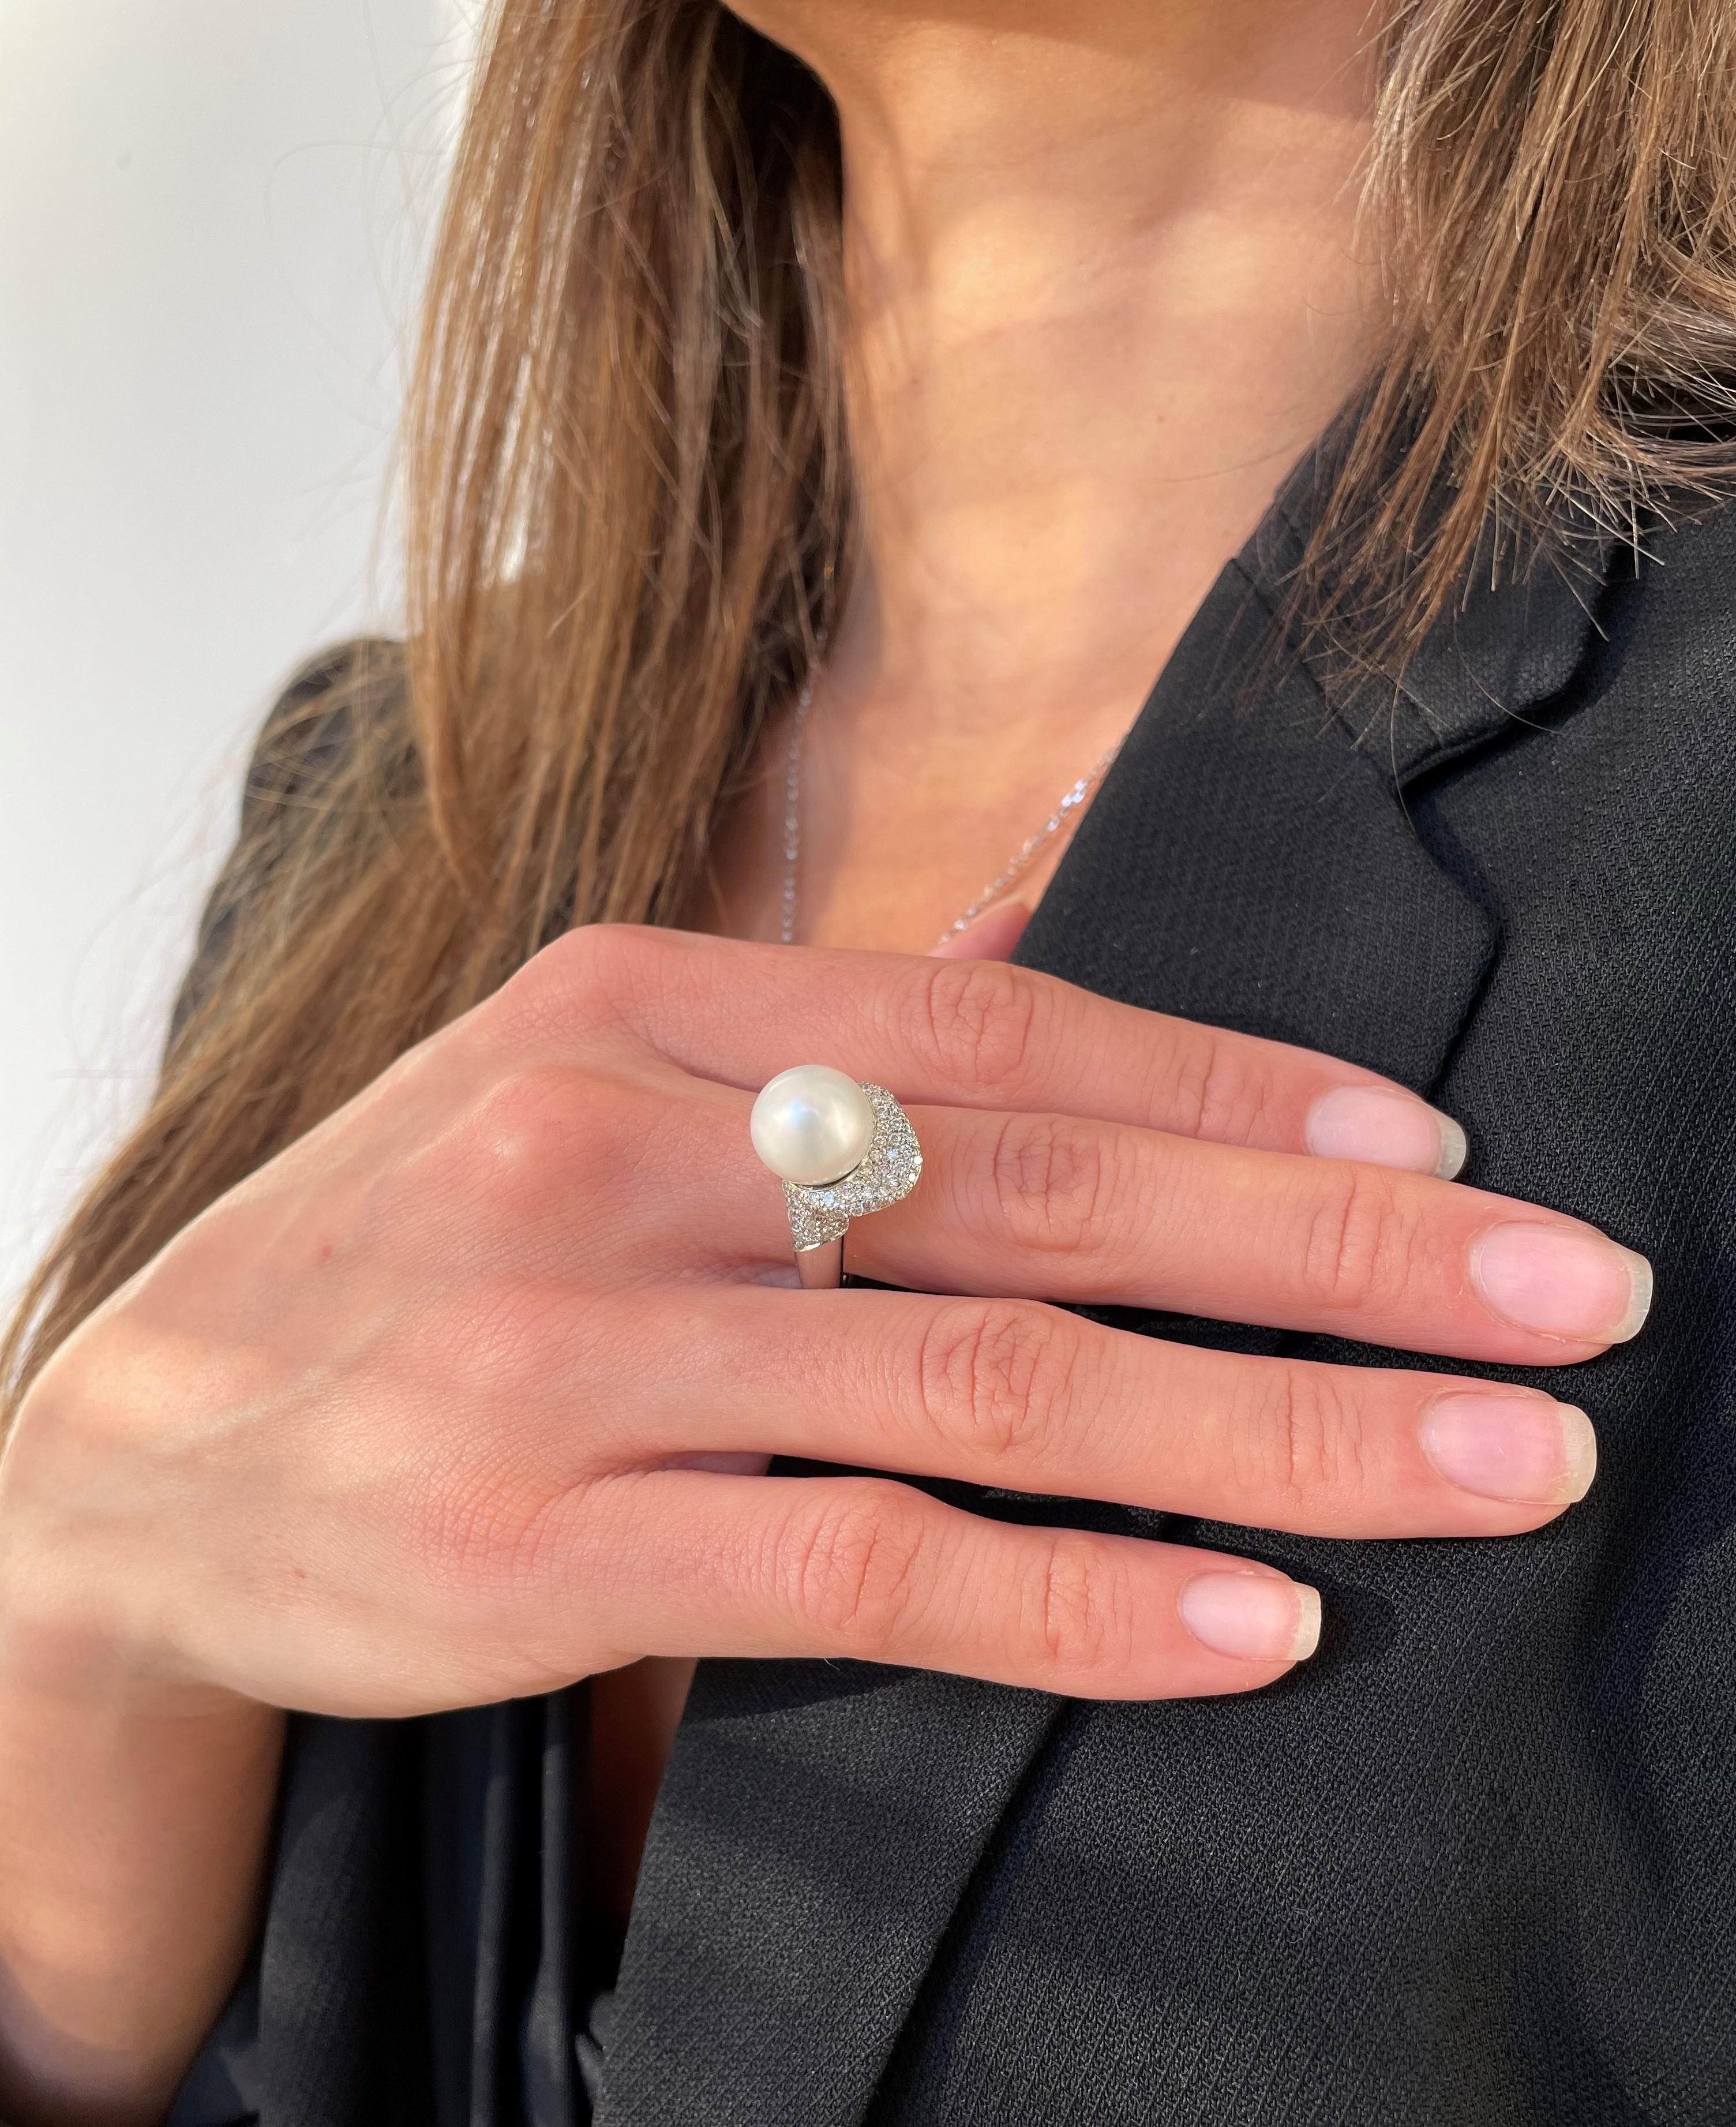 Rosior Classic Pearl and Diamond Ring set in Platinum with:
- 1 irregular South Sea pearl;
- 79 Round Cut Diamonds (G-VVS) with 0,63 ct.
Stamped by the portuguese assay office as 950 Platinum.
Stamped with Rosior hallmark.
Loyal to artisanal